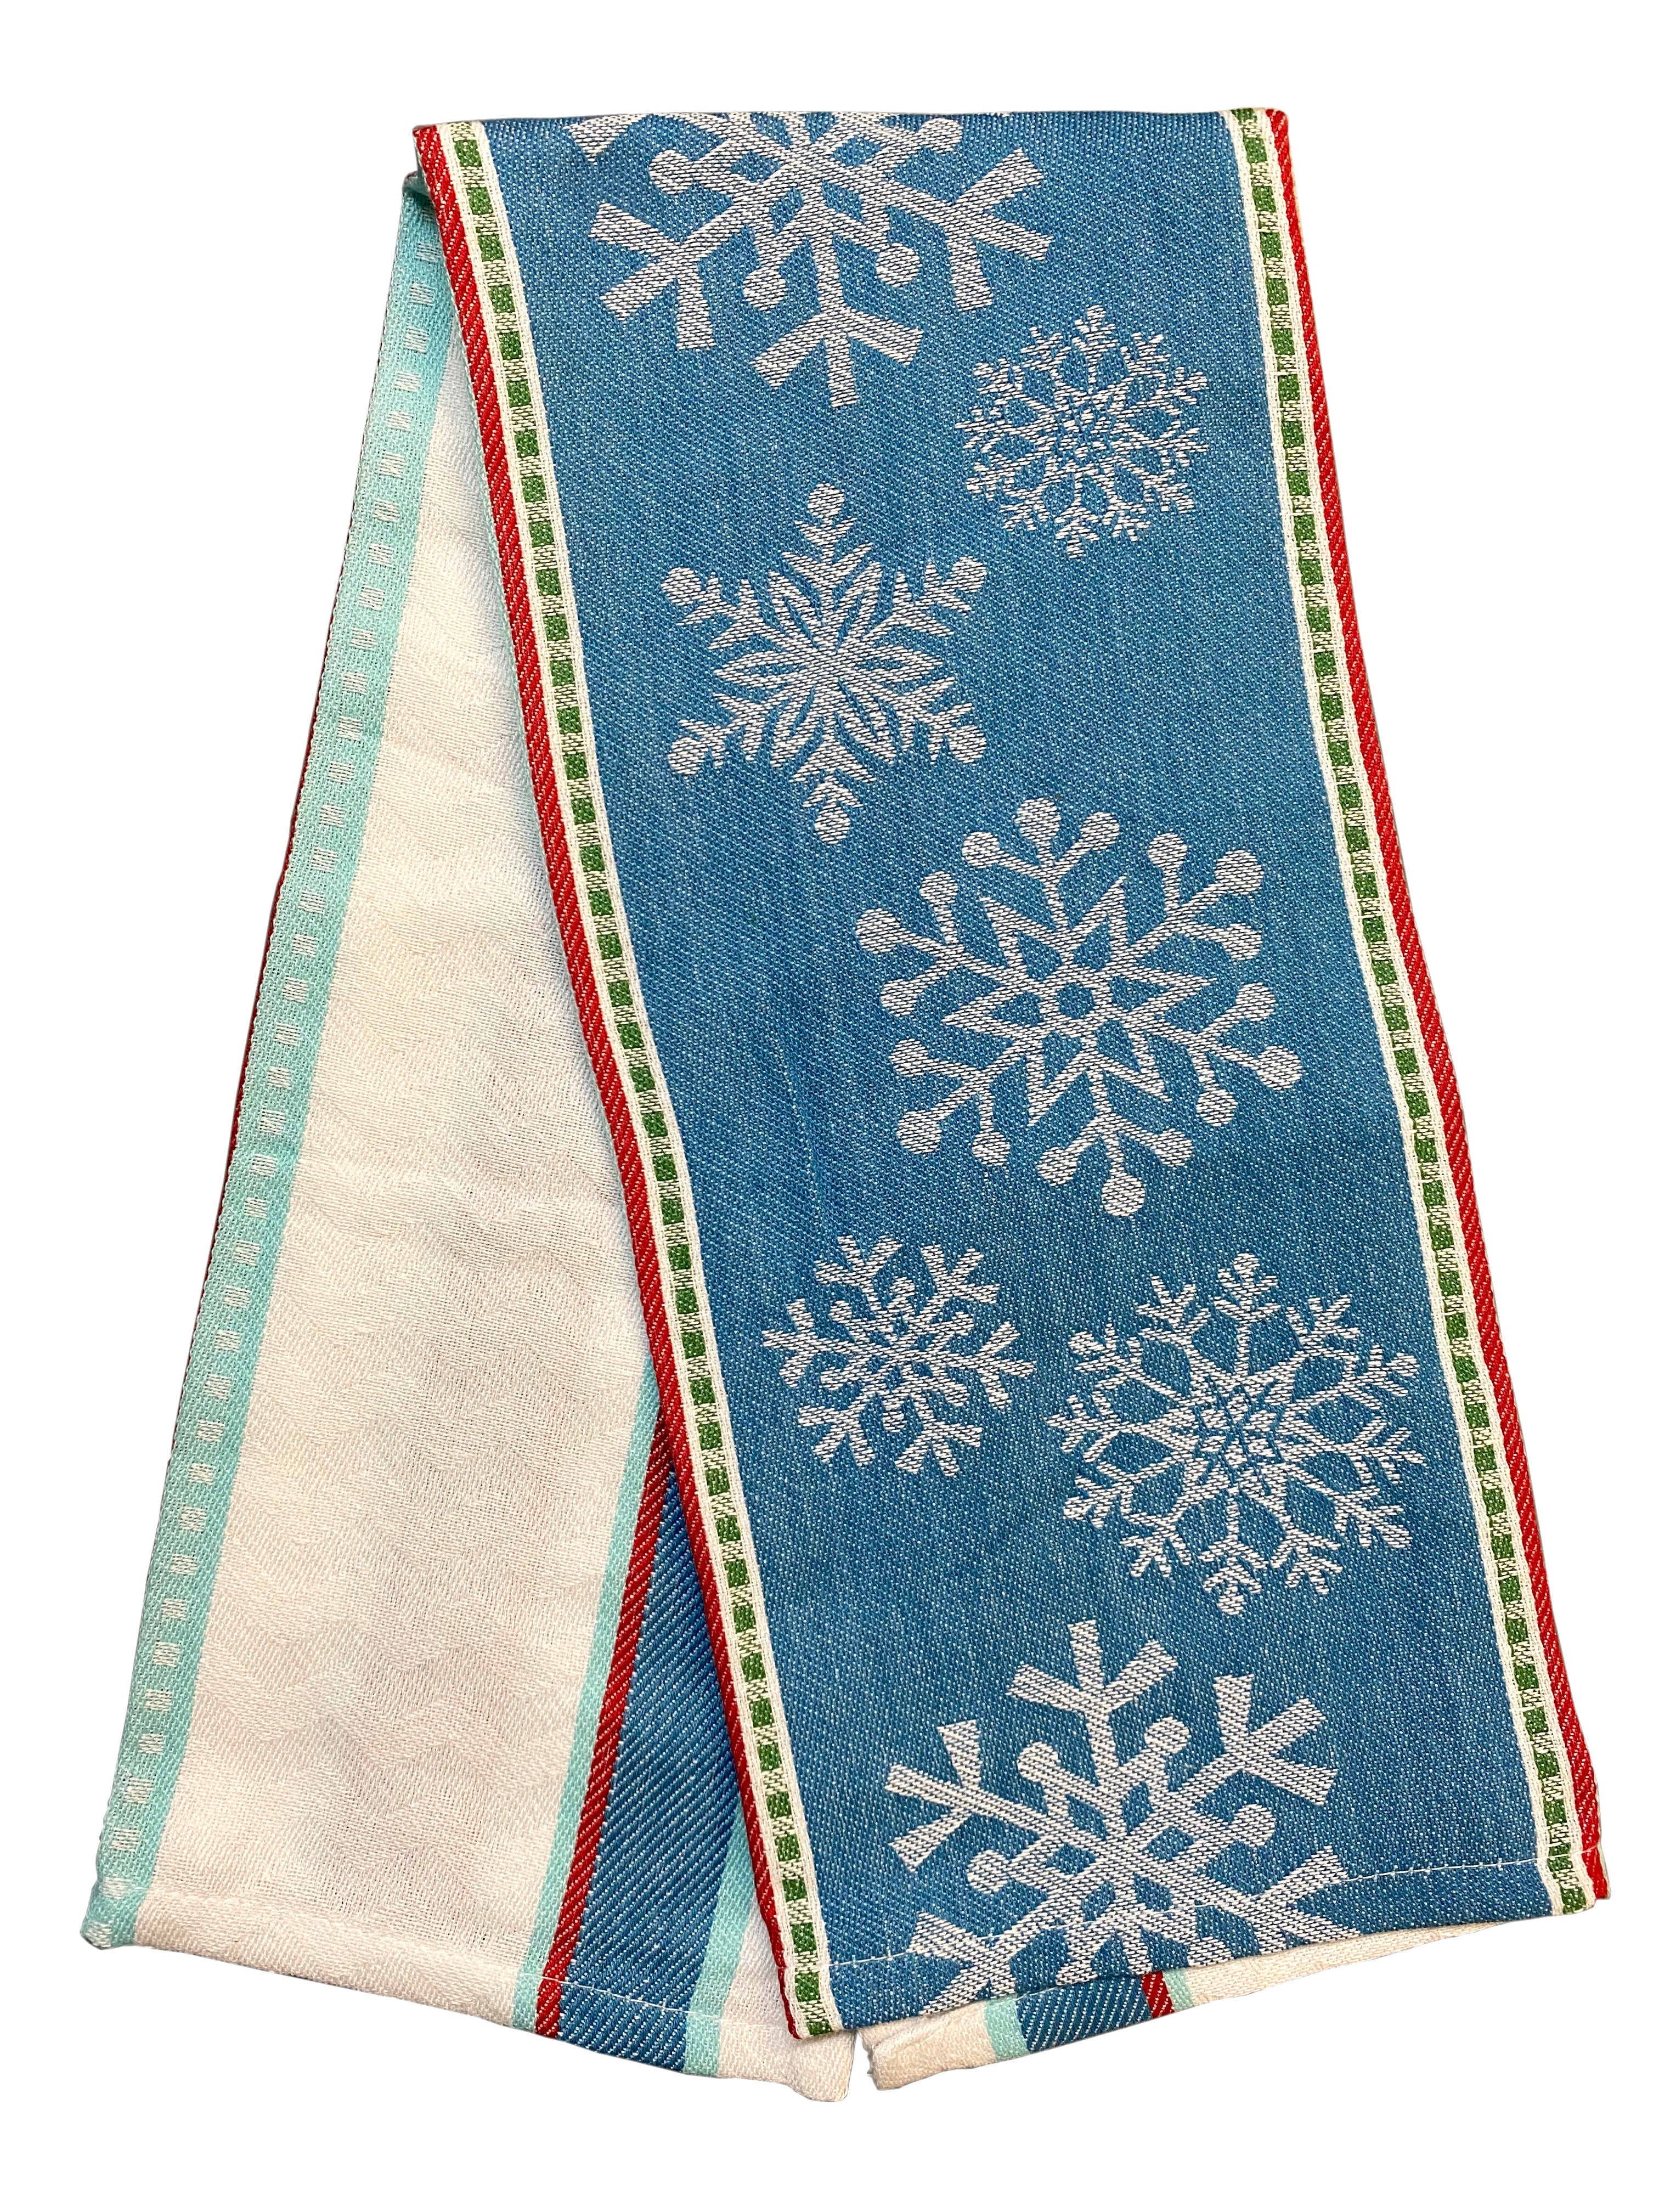 Snowflake Jacquard Kitchen Towel - Red, Green,or Blue    